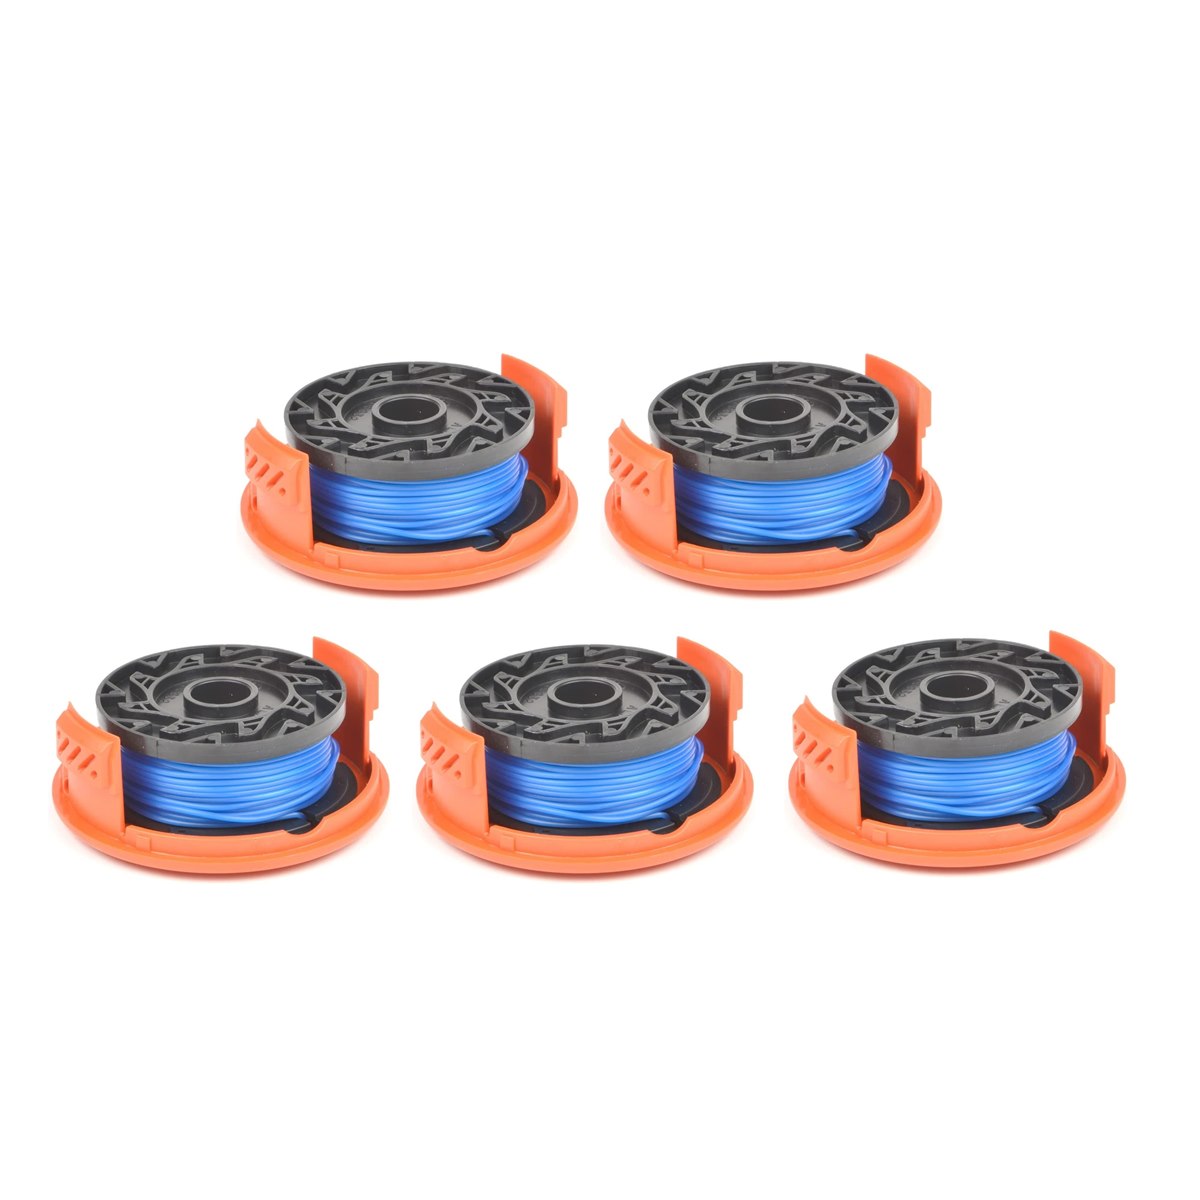 Case of 5 x ALM BD432 Spool And Line With Cover for Black and Decker Reflex Plus Trimmers